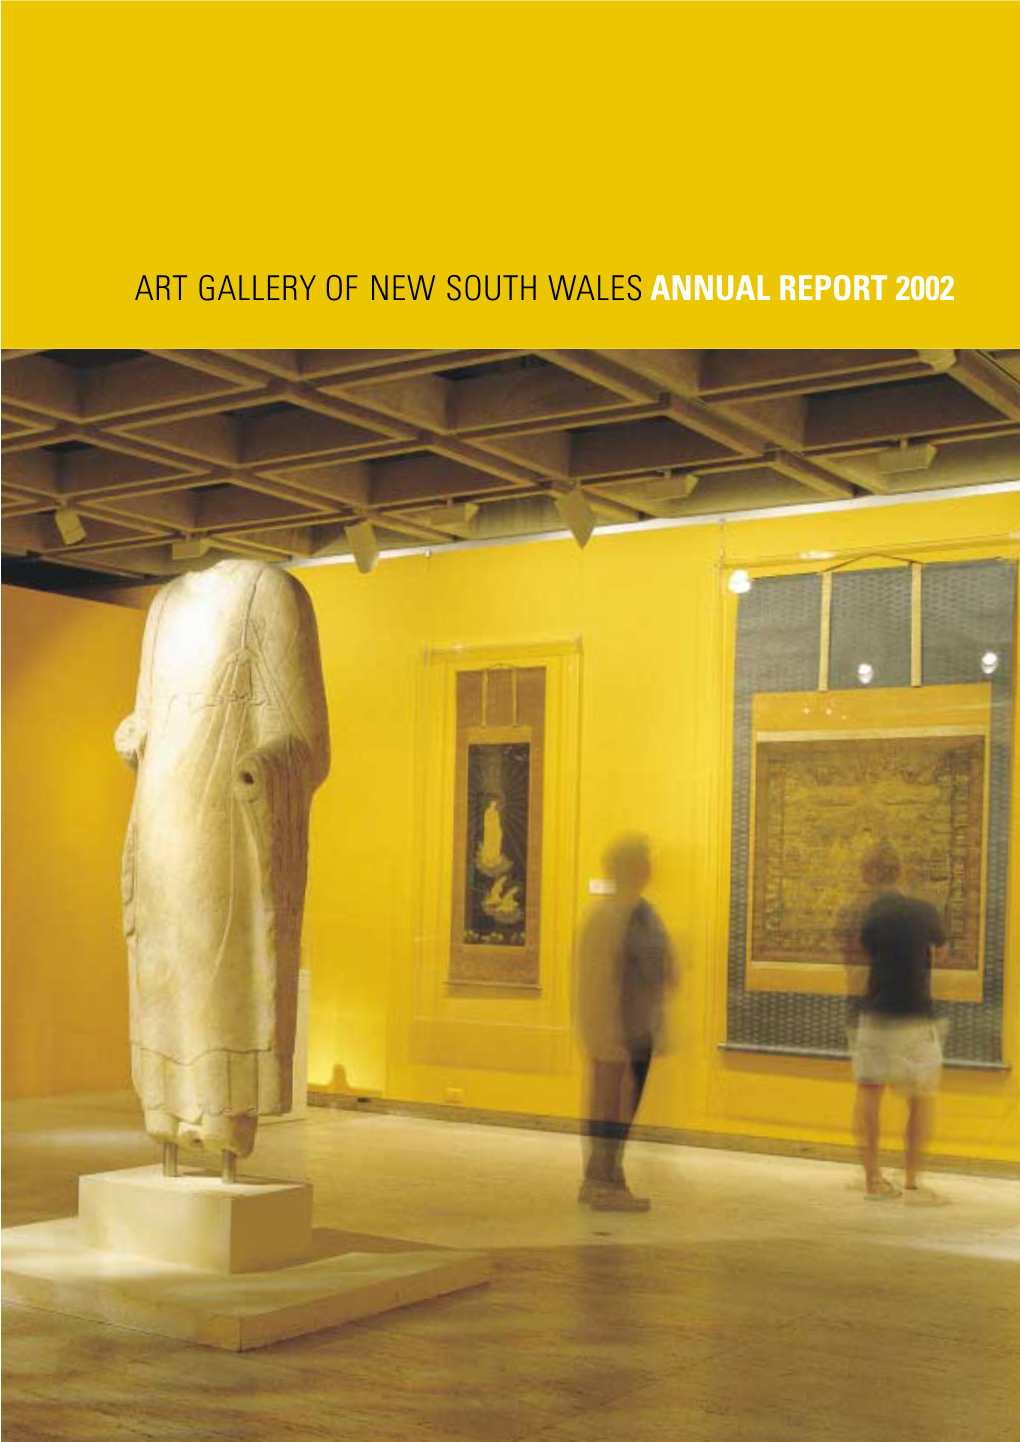 Art Gallery of New South Wales Annual Report 2002 Table of Contents Art Gallery of New South Wales Highlights